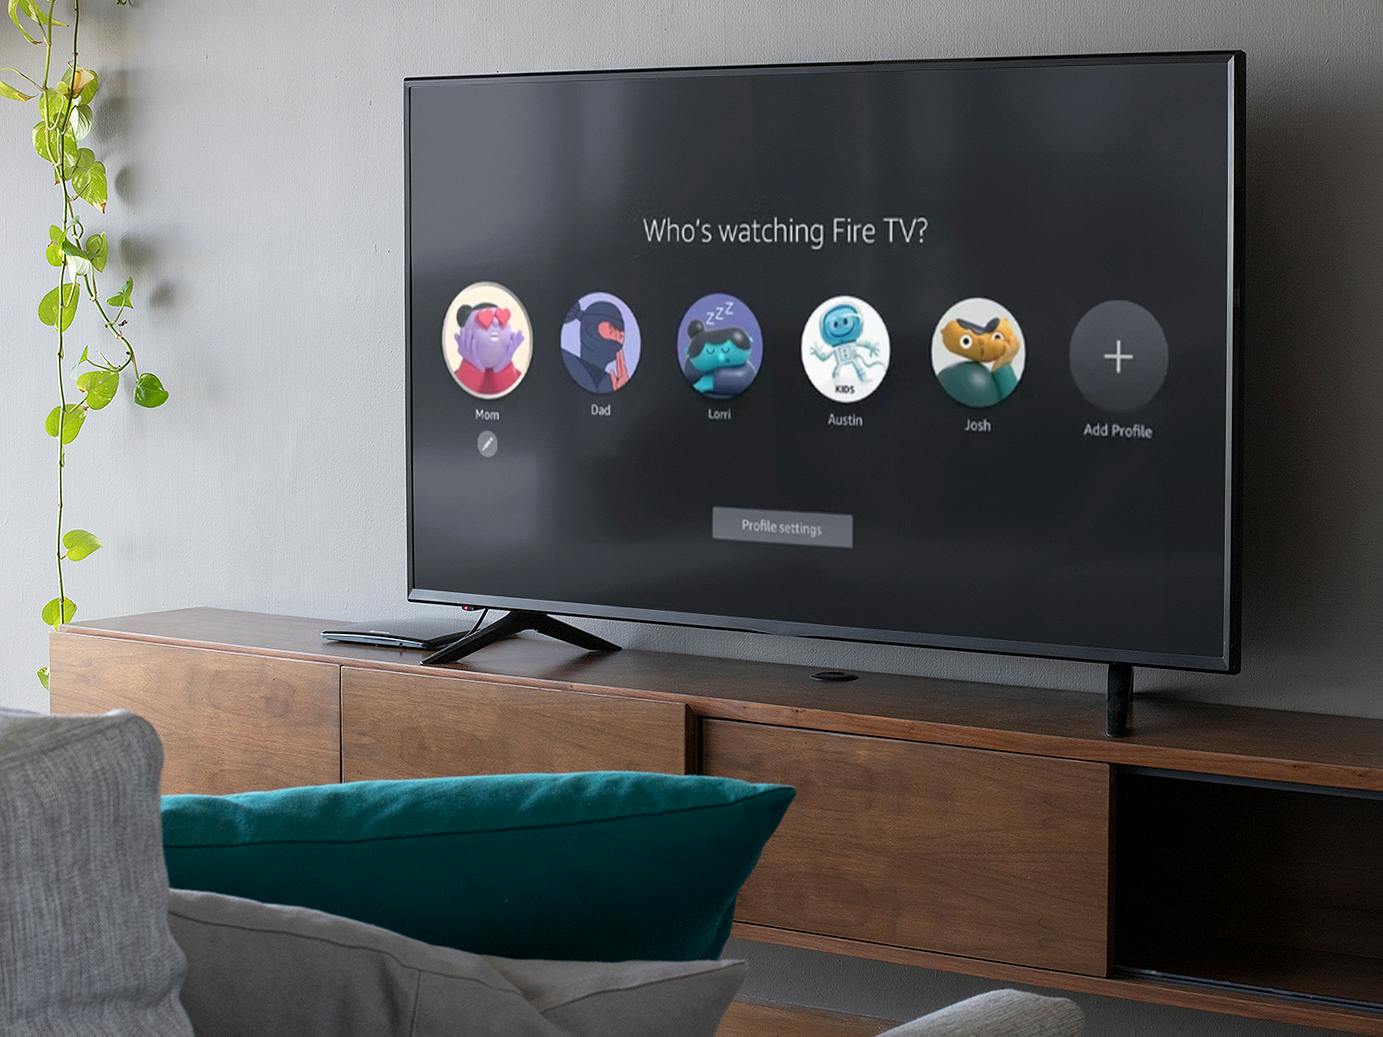 tv screen in living room showing various amazon prime video profiles